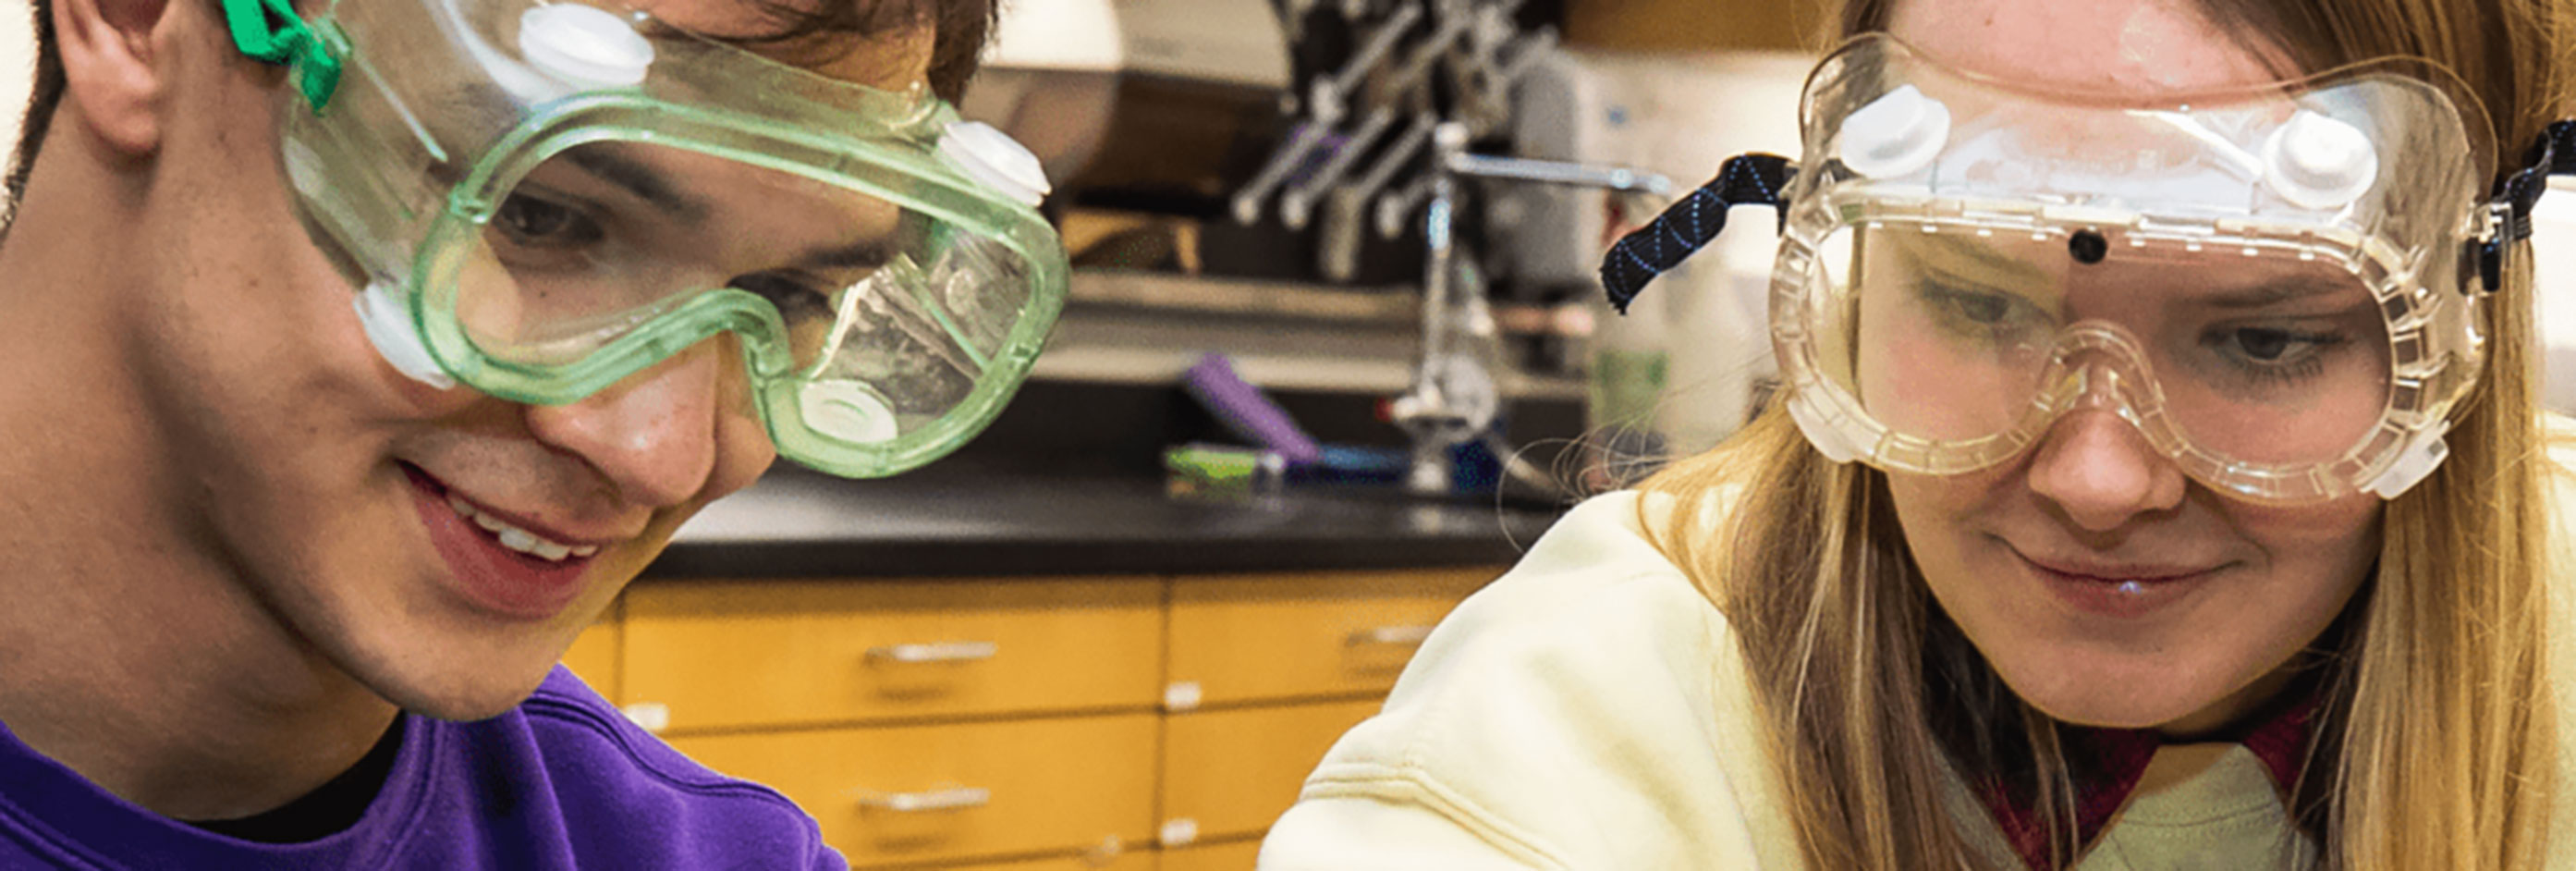 two students in safety goggles work with lab equipment